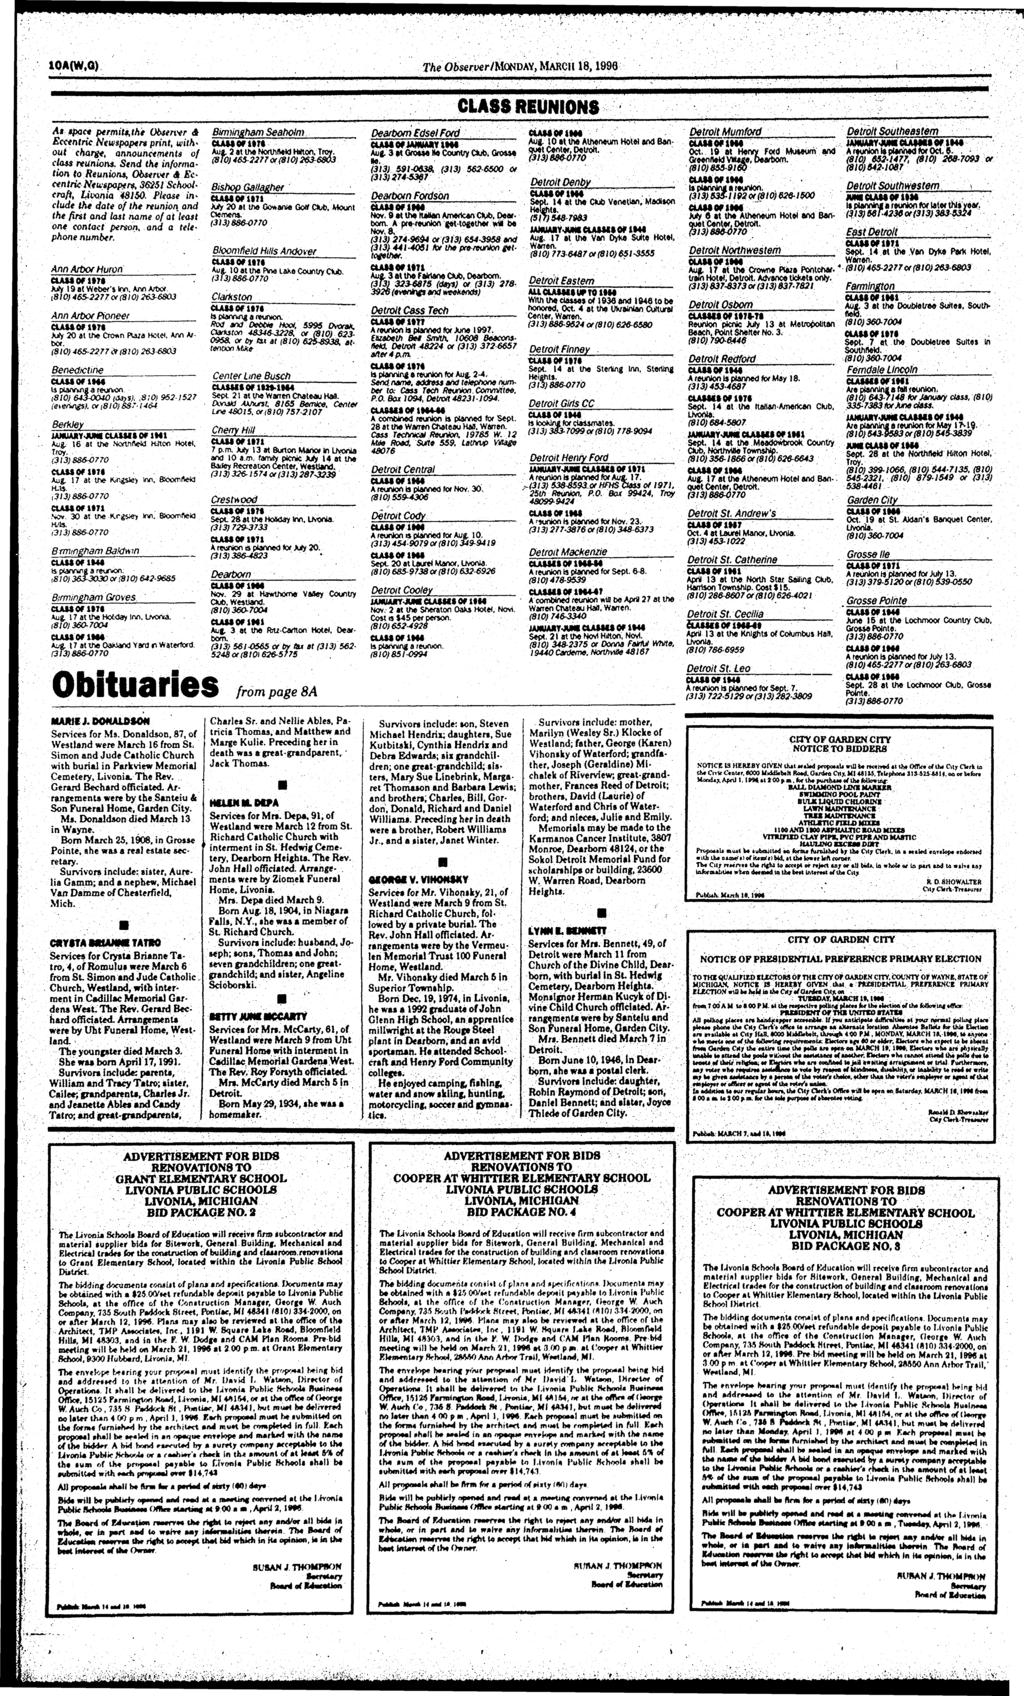 : -.. wr* 10A(W,Q) T/e06s rwr/monday, MARCH 18,1990 M space perts,the Observer dr Eccentrc Newspapers prnt, wthout charge, announcernenu of class reunons.